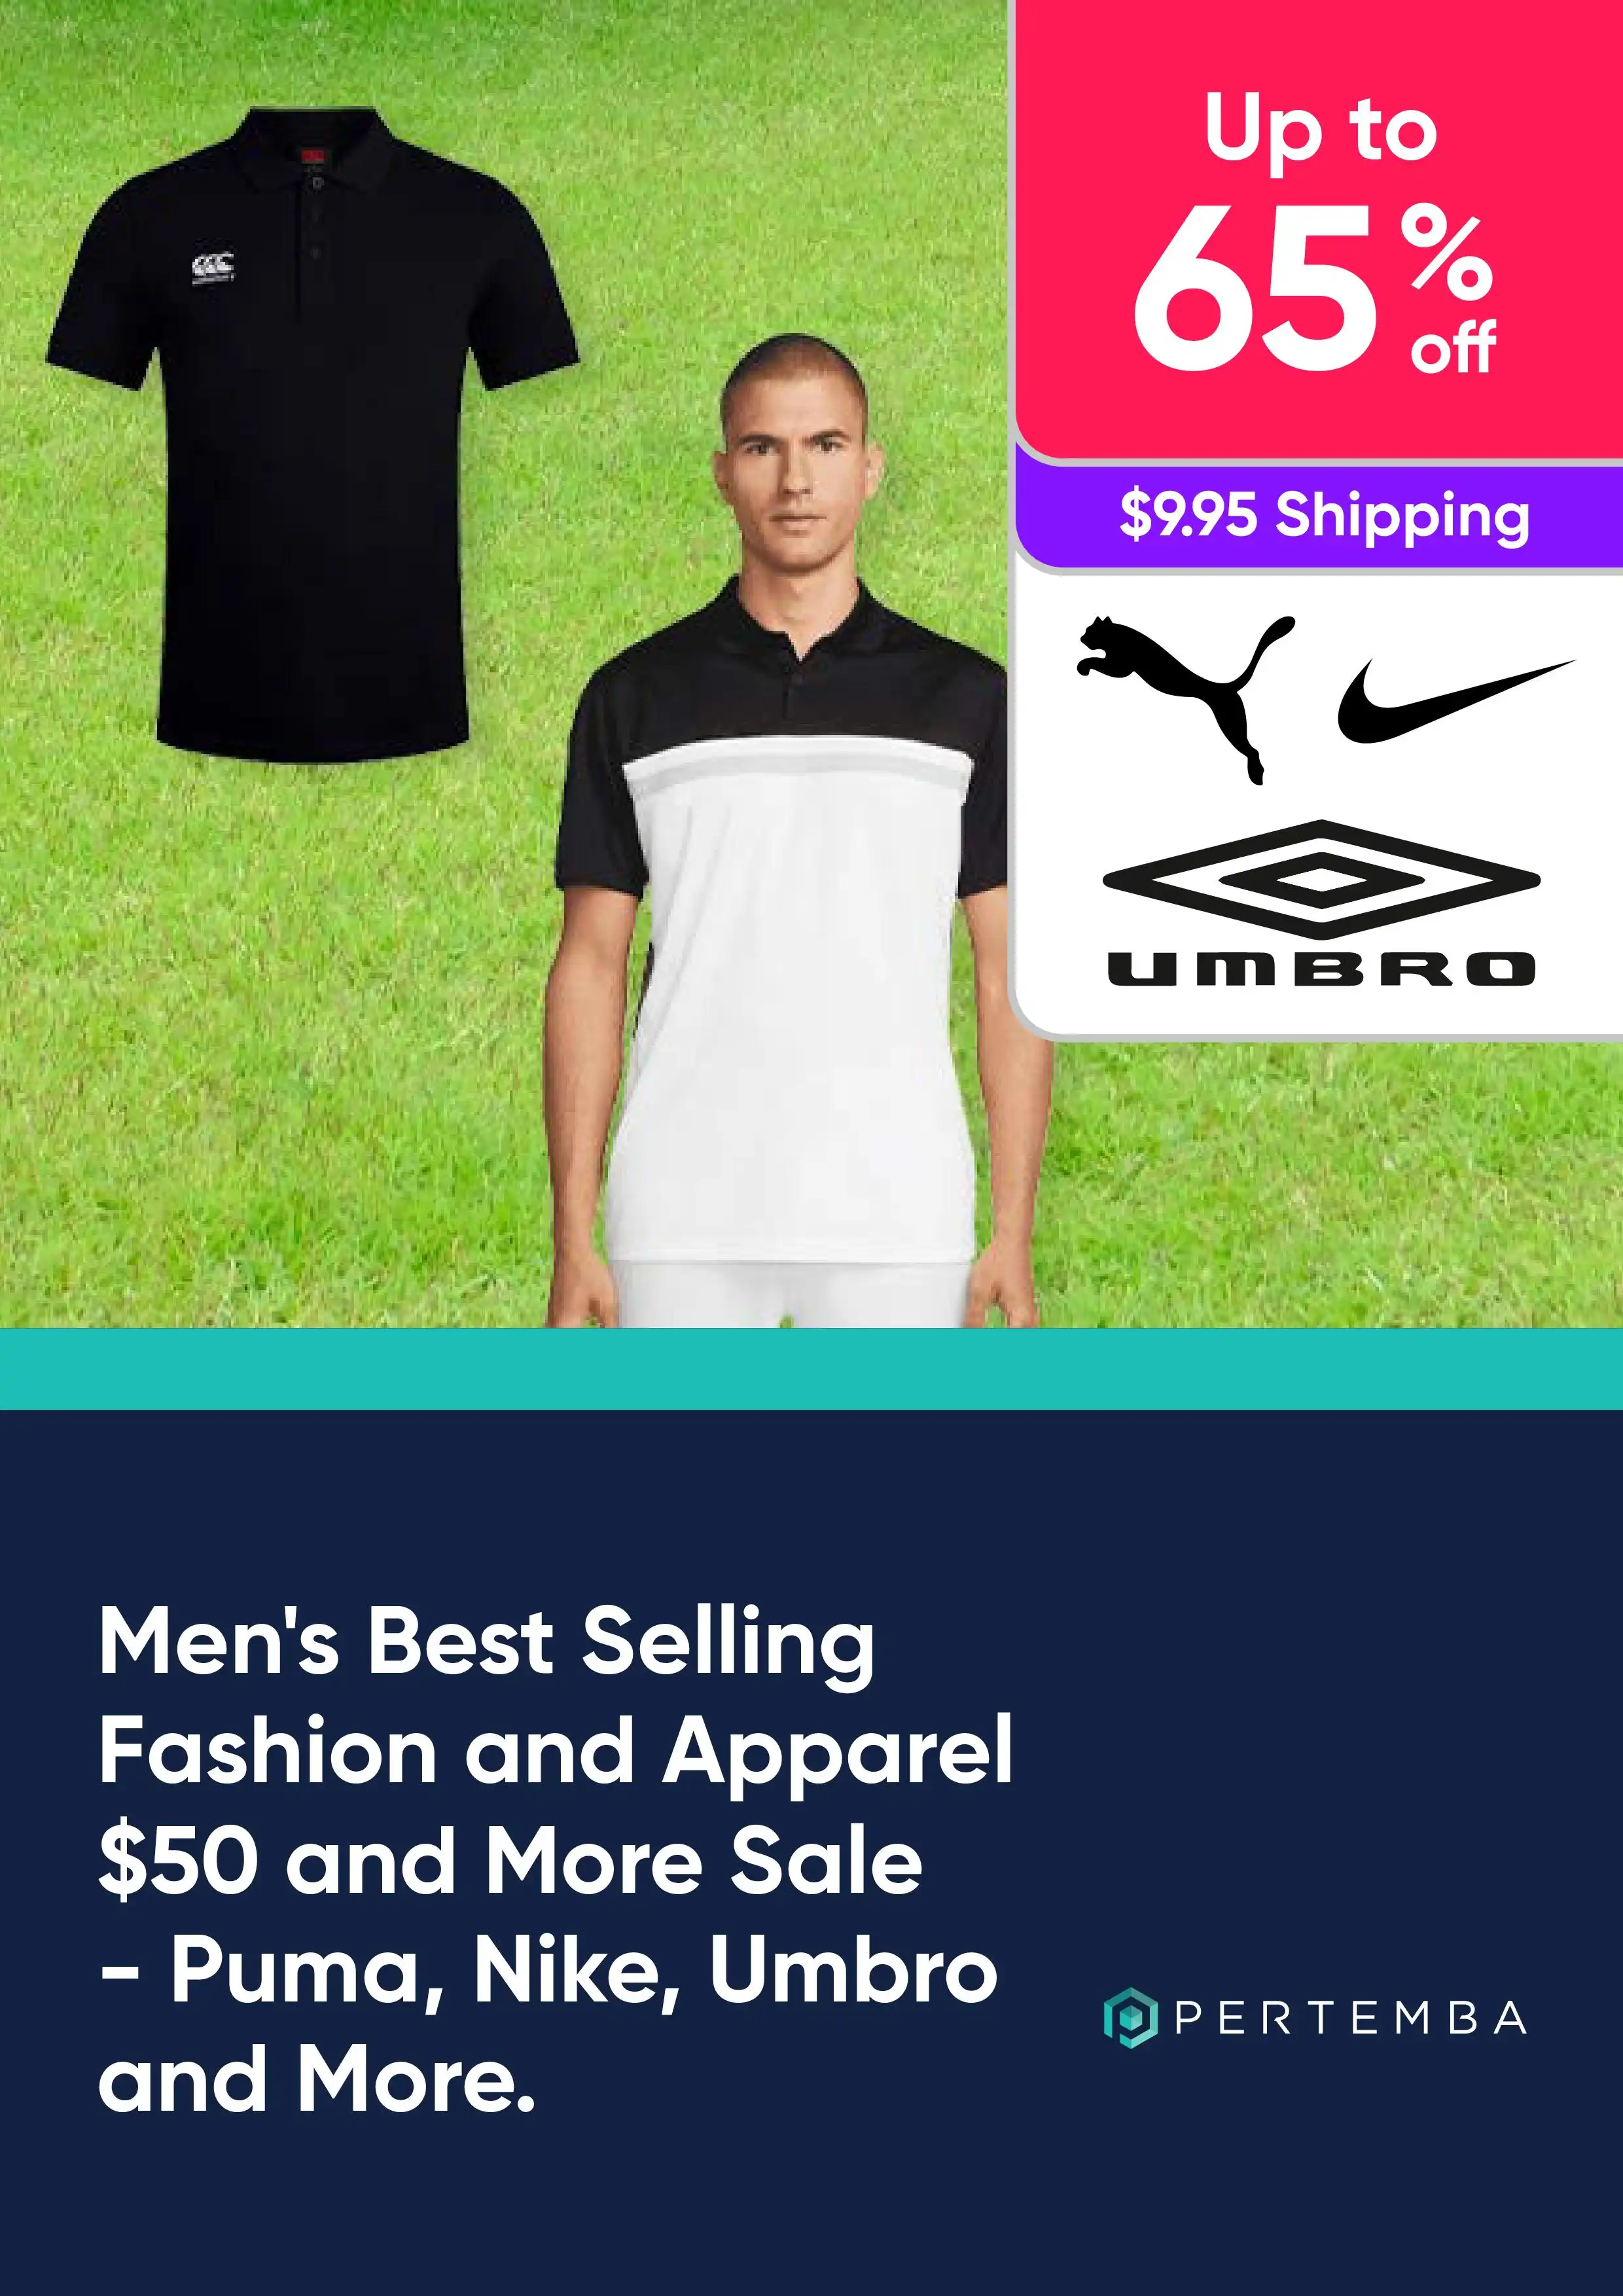 Men’s Best Selling Fashion and Apparel $50 and More Sale - Up to 60% Off